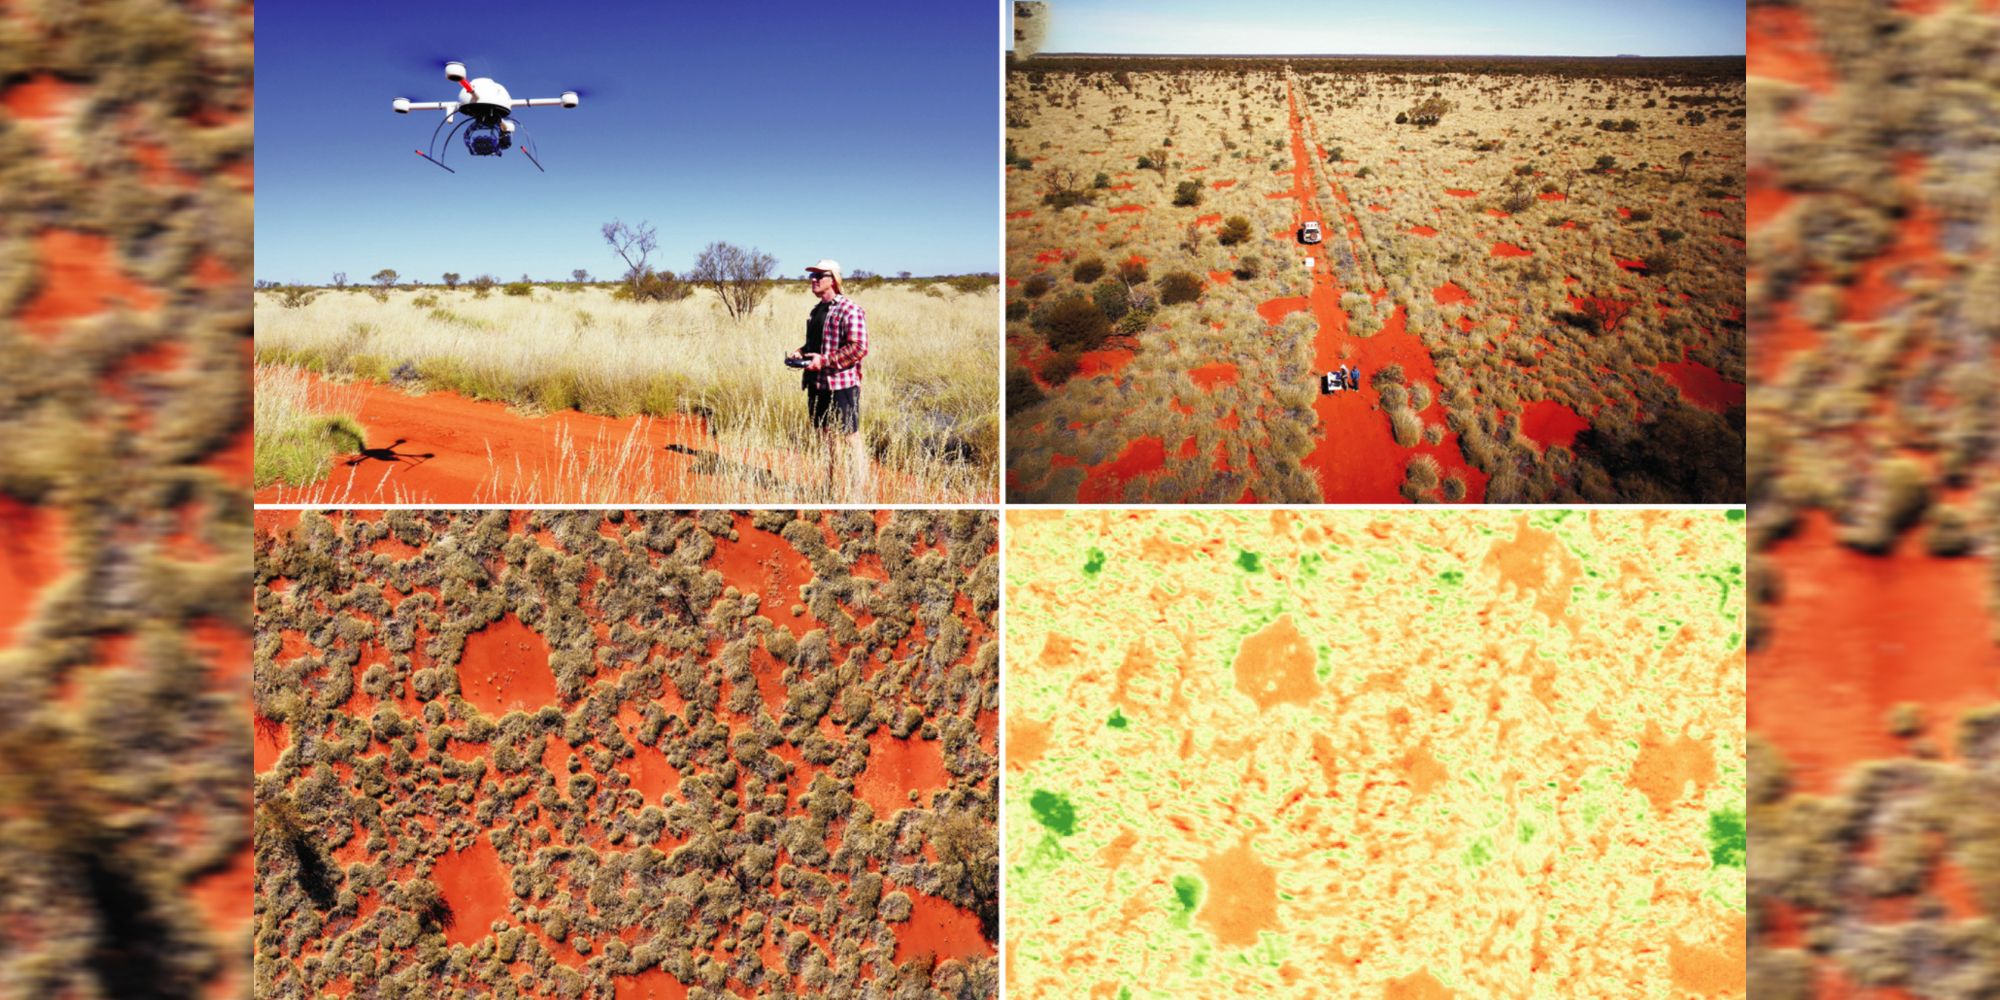 Fairy Circles May Now Exist in 15 Countries. So What Are They?